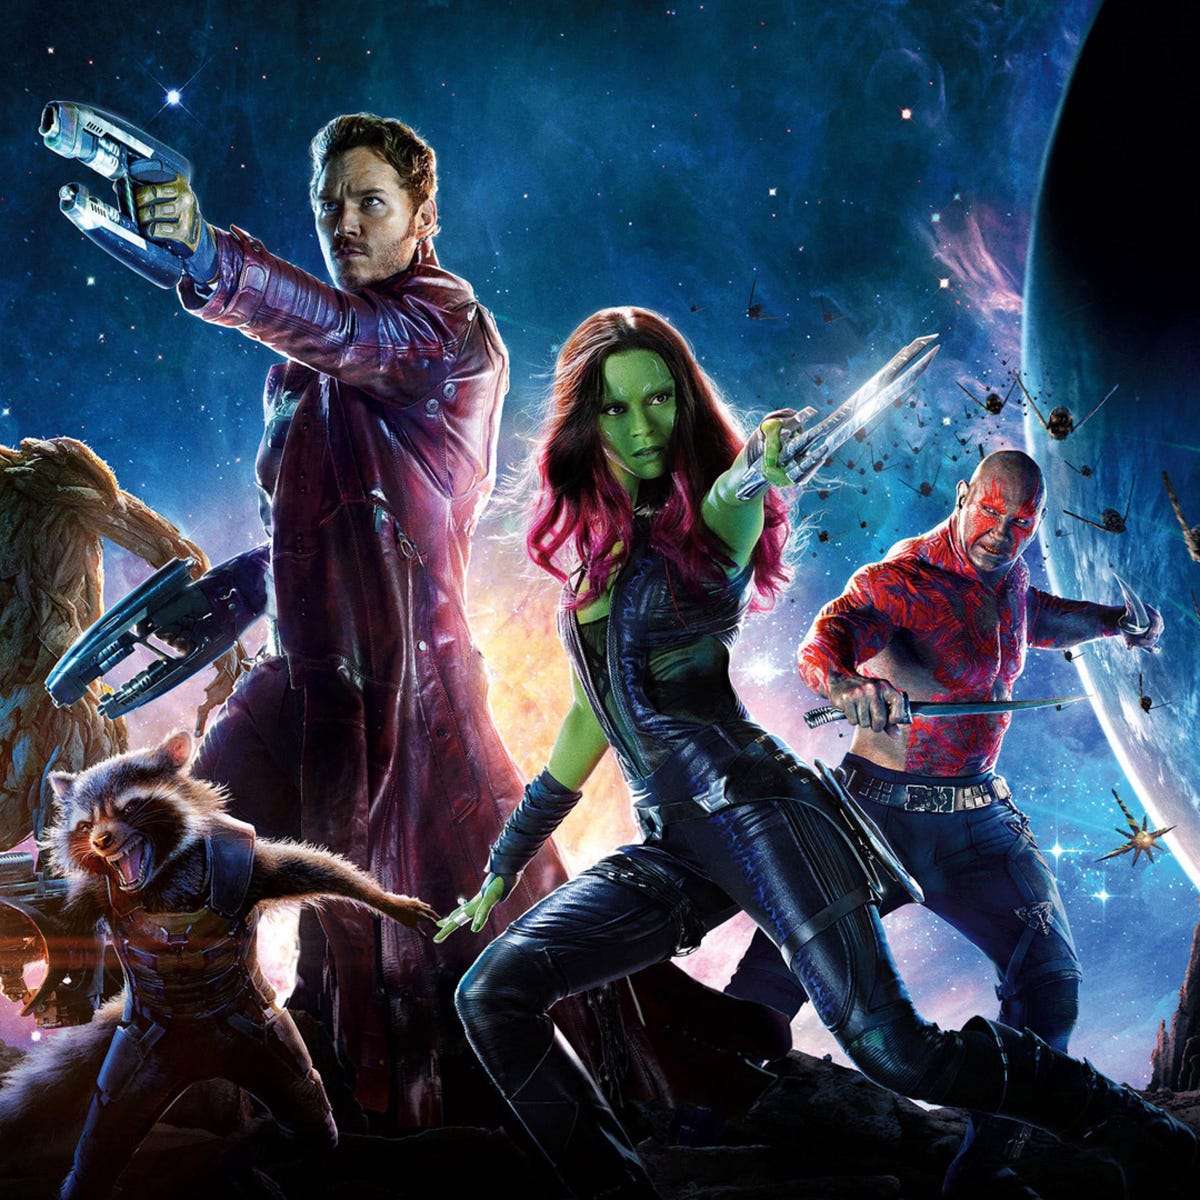 Guardians of the Galaxy Vol. 2' script is online for free - CNET